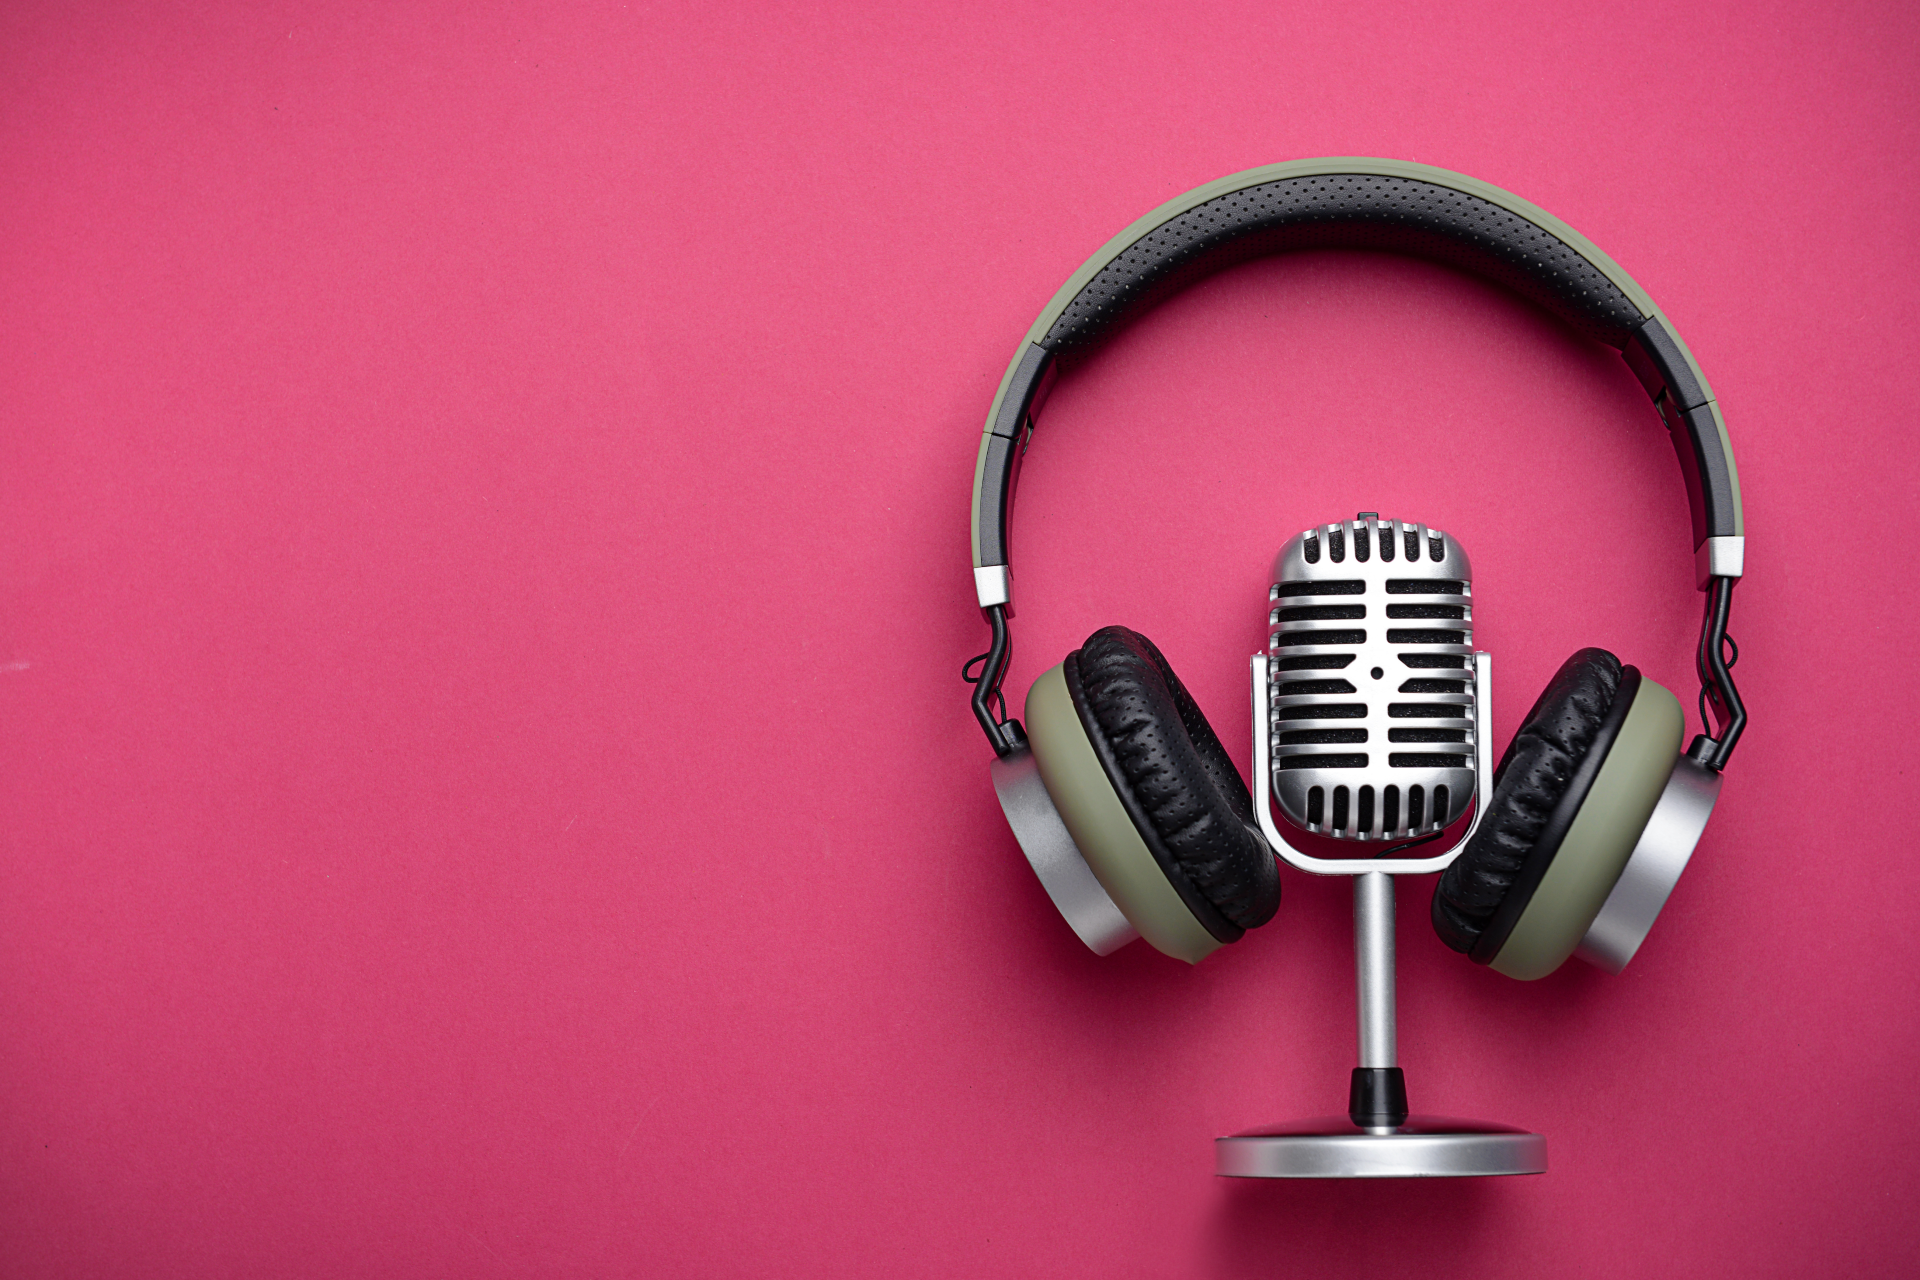 Microphone and headphones on a pink background